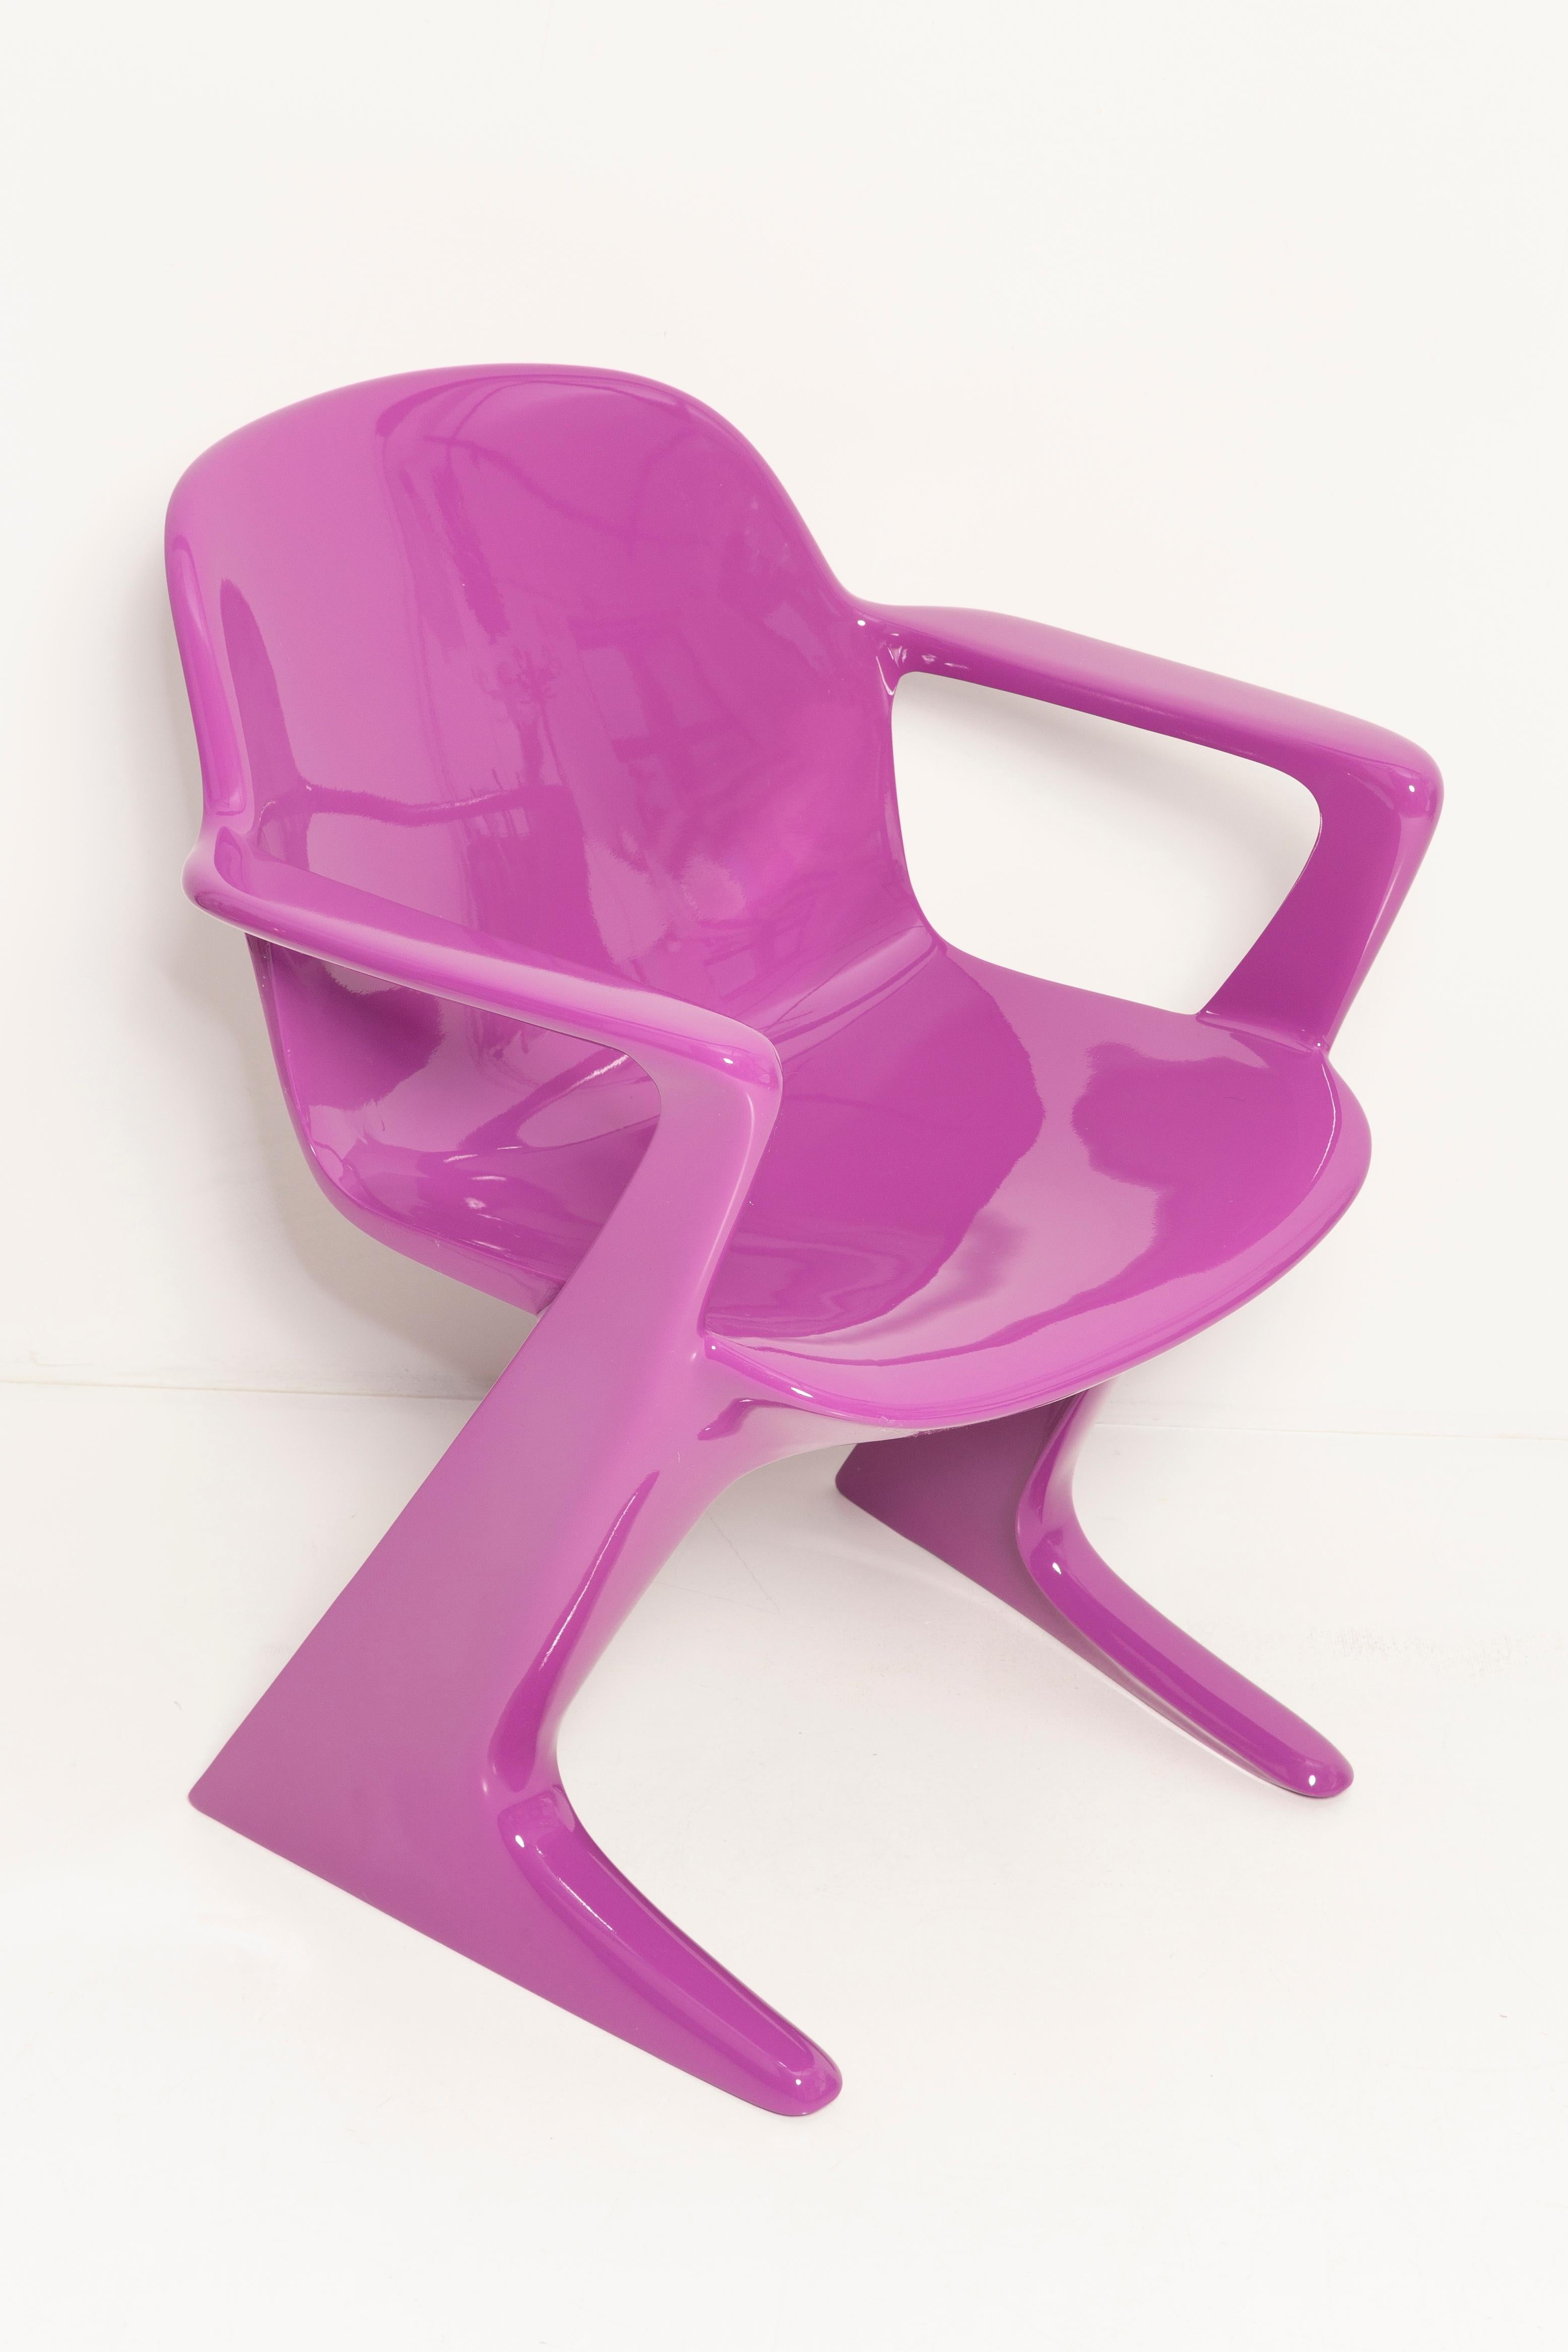 Lacquered Set of Twelve Mid-Century Purple Kangaroo Chairs, by Ernst Moeckl, Germany, 1968 For Sale